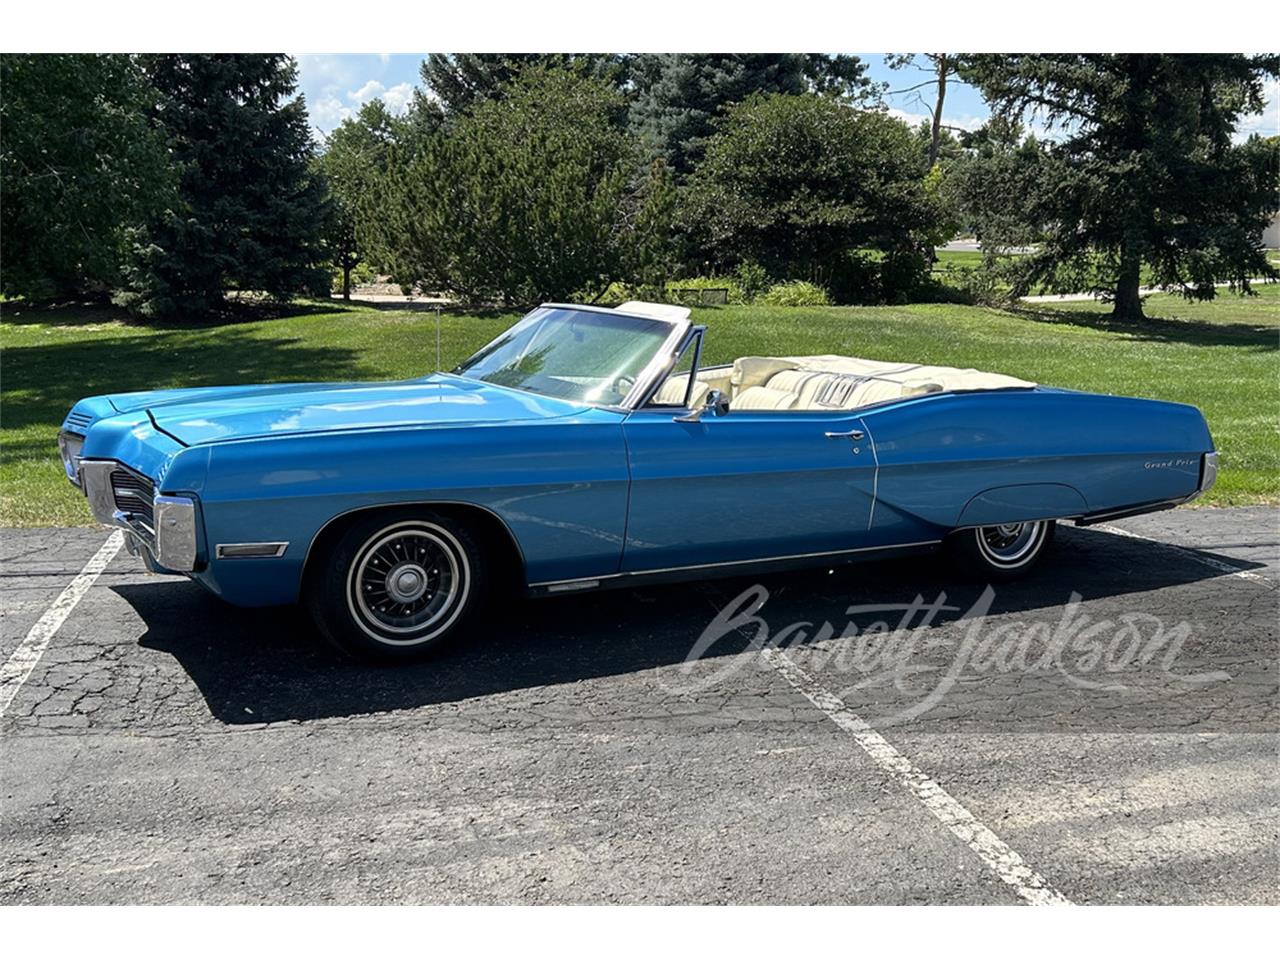 For Sale at Auction: 1967 Pontiac Grand Prix in Scottsdale, Arizona for sale in Scottsdale, AZ